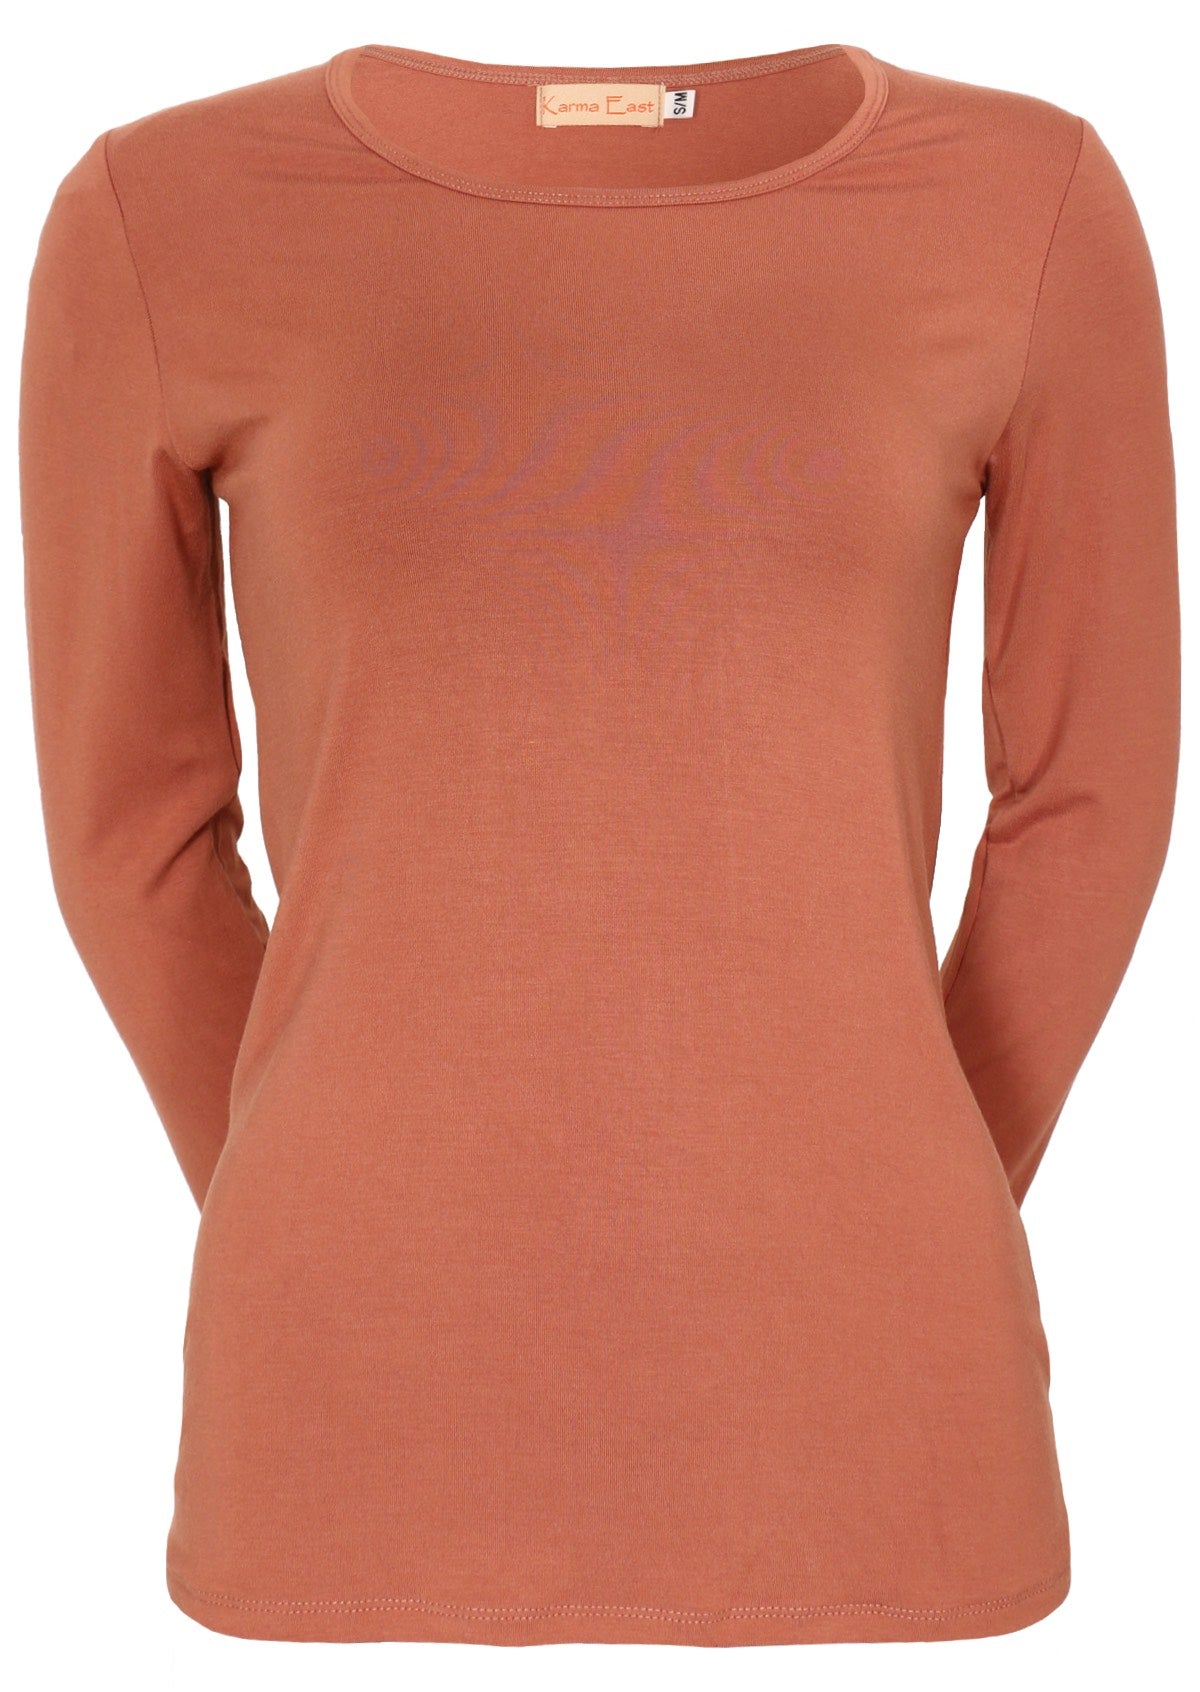 Front view women's round neck dusty pink long sleeve rayon top.